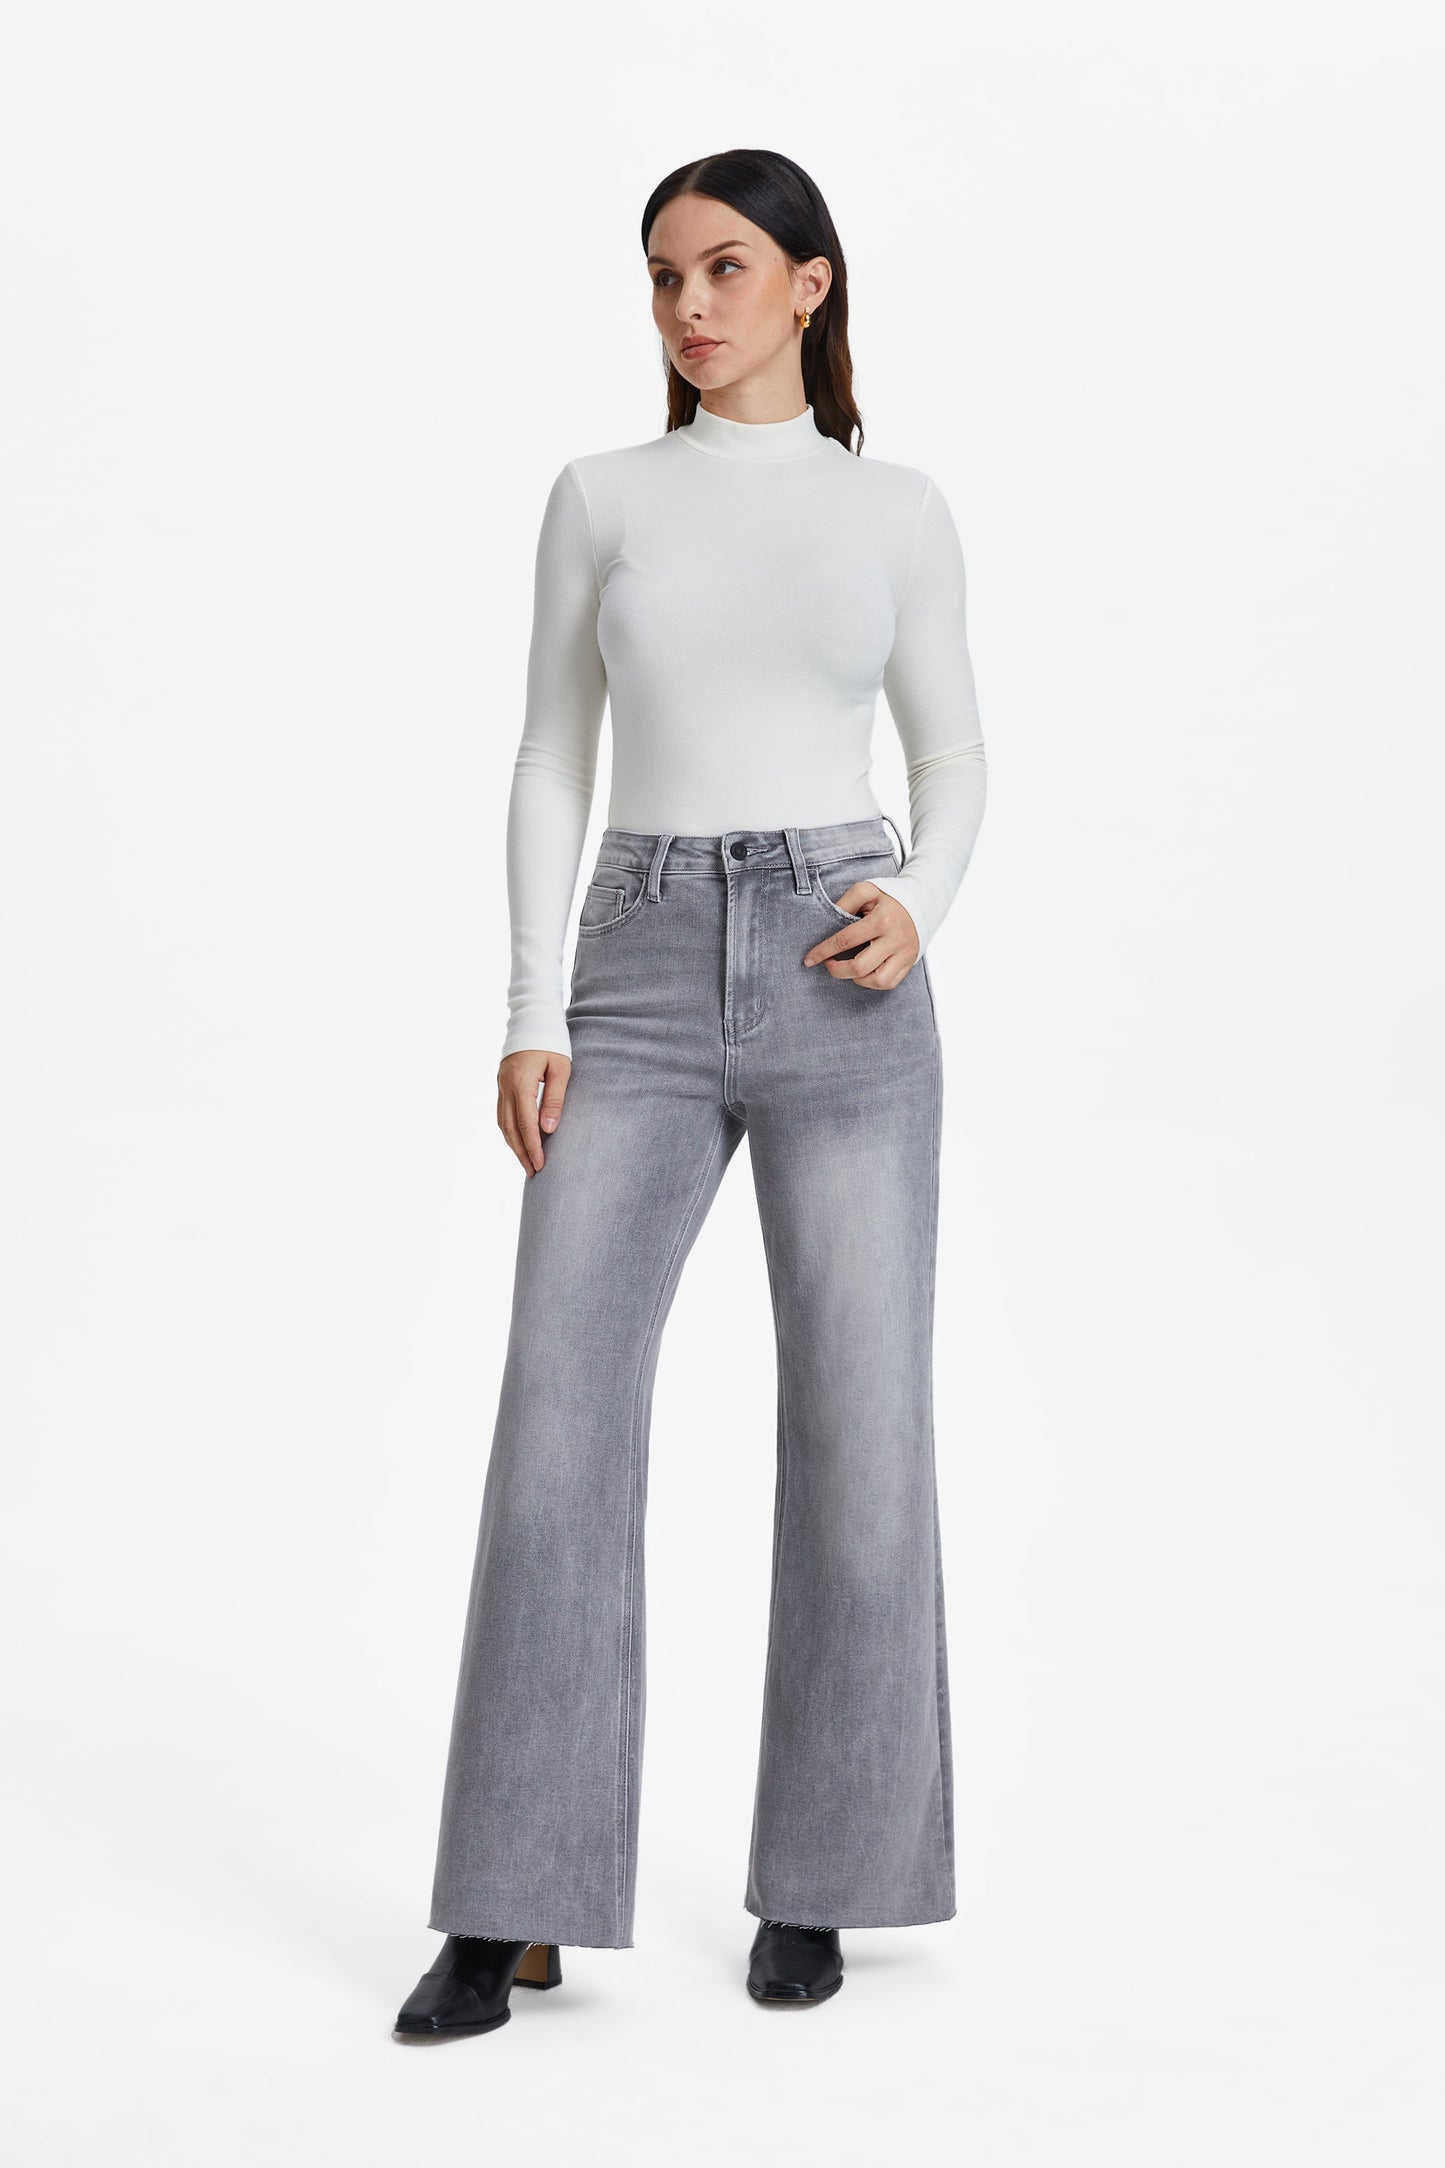 BELLA HIGH RISE WIDE LEG JEANS WITH RAW HEM BYW8101 STONE GRAY